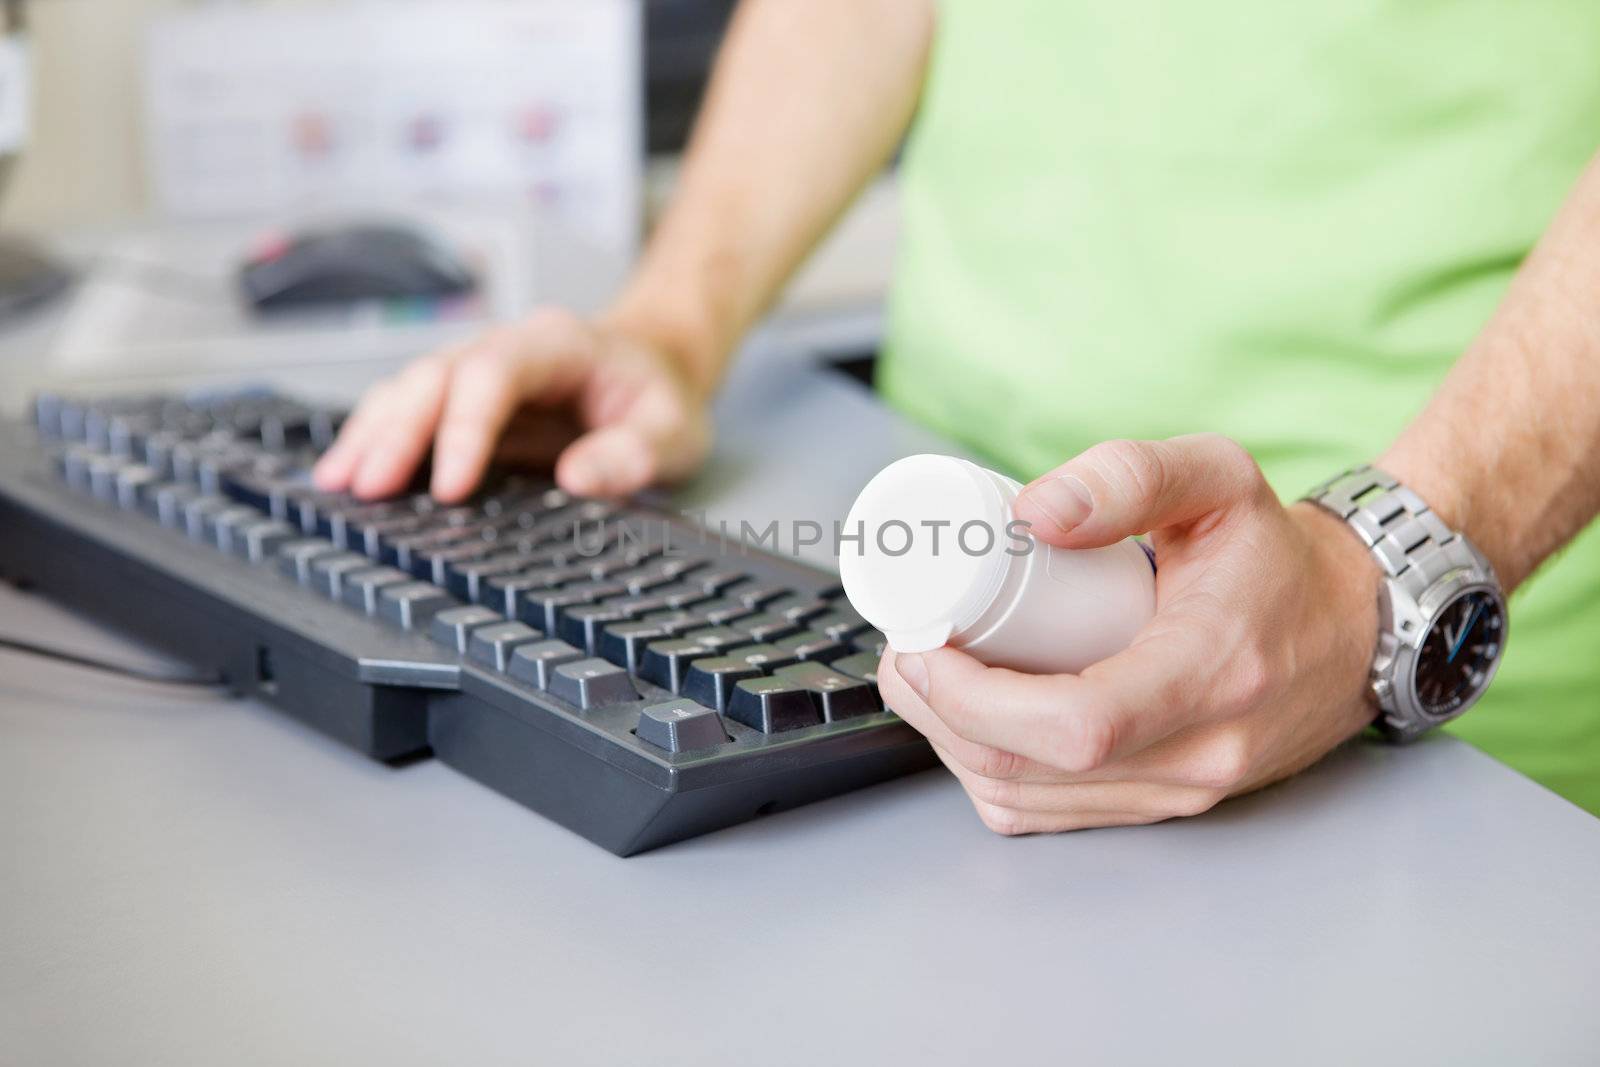 Cropped image of male hand holding medicine container while typing on keyboard